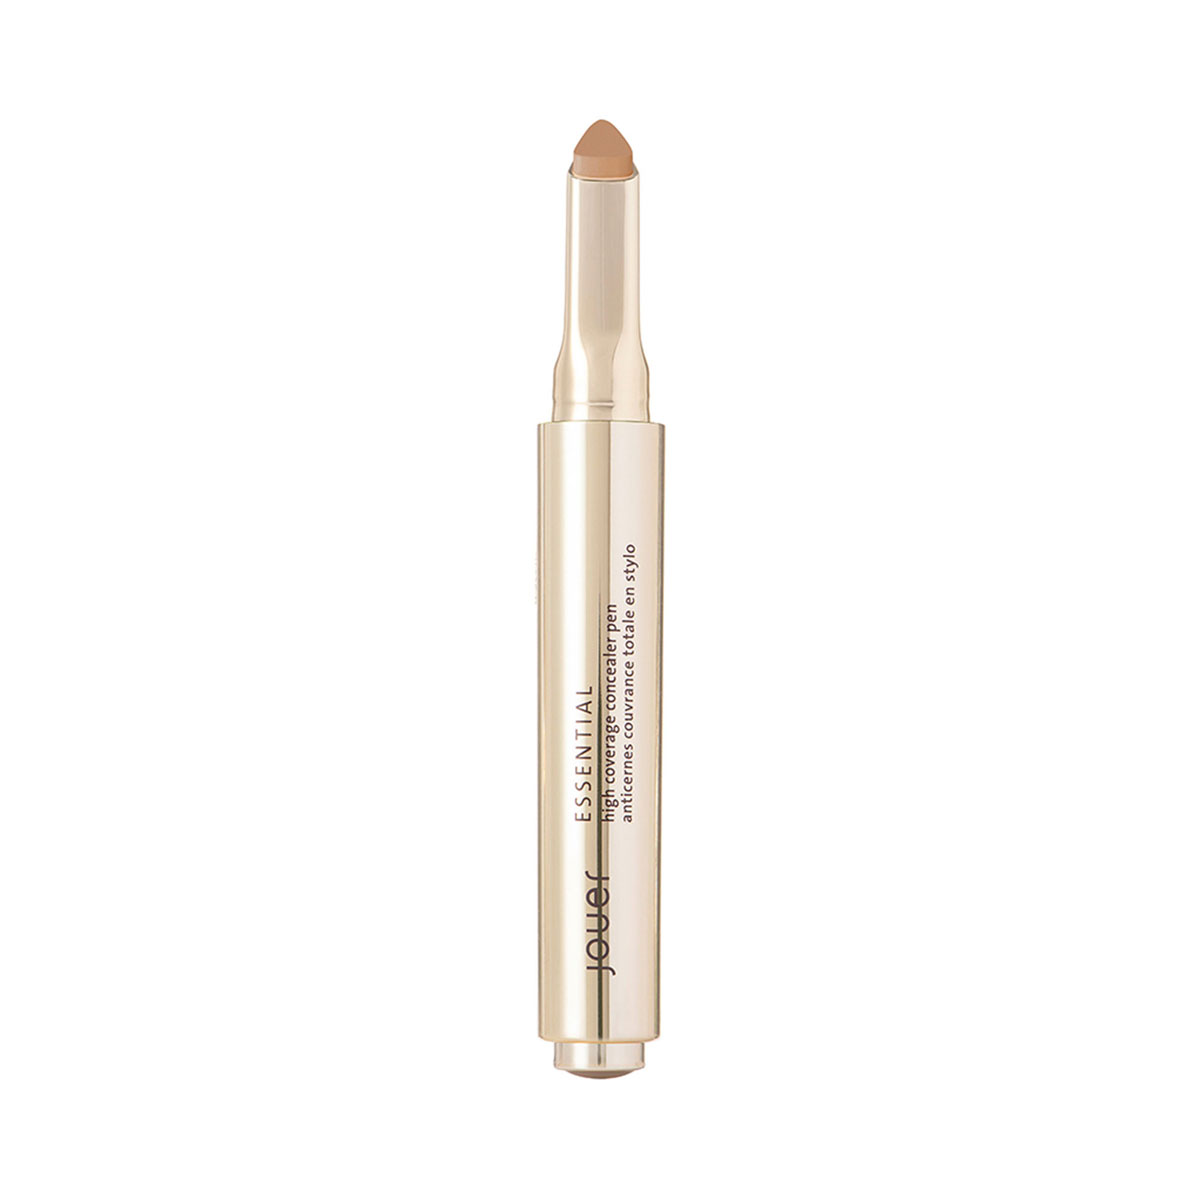 Jouer Cosmetics Essential High Coverage Concealer Pen 23G Ginger